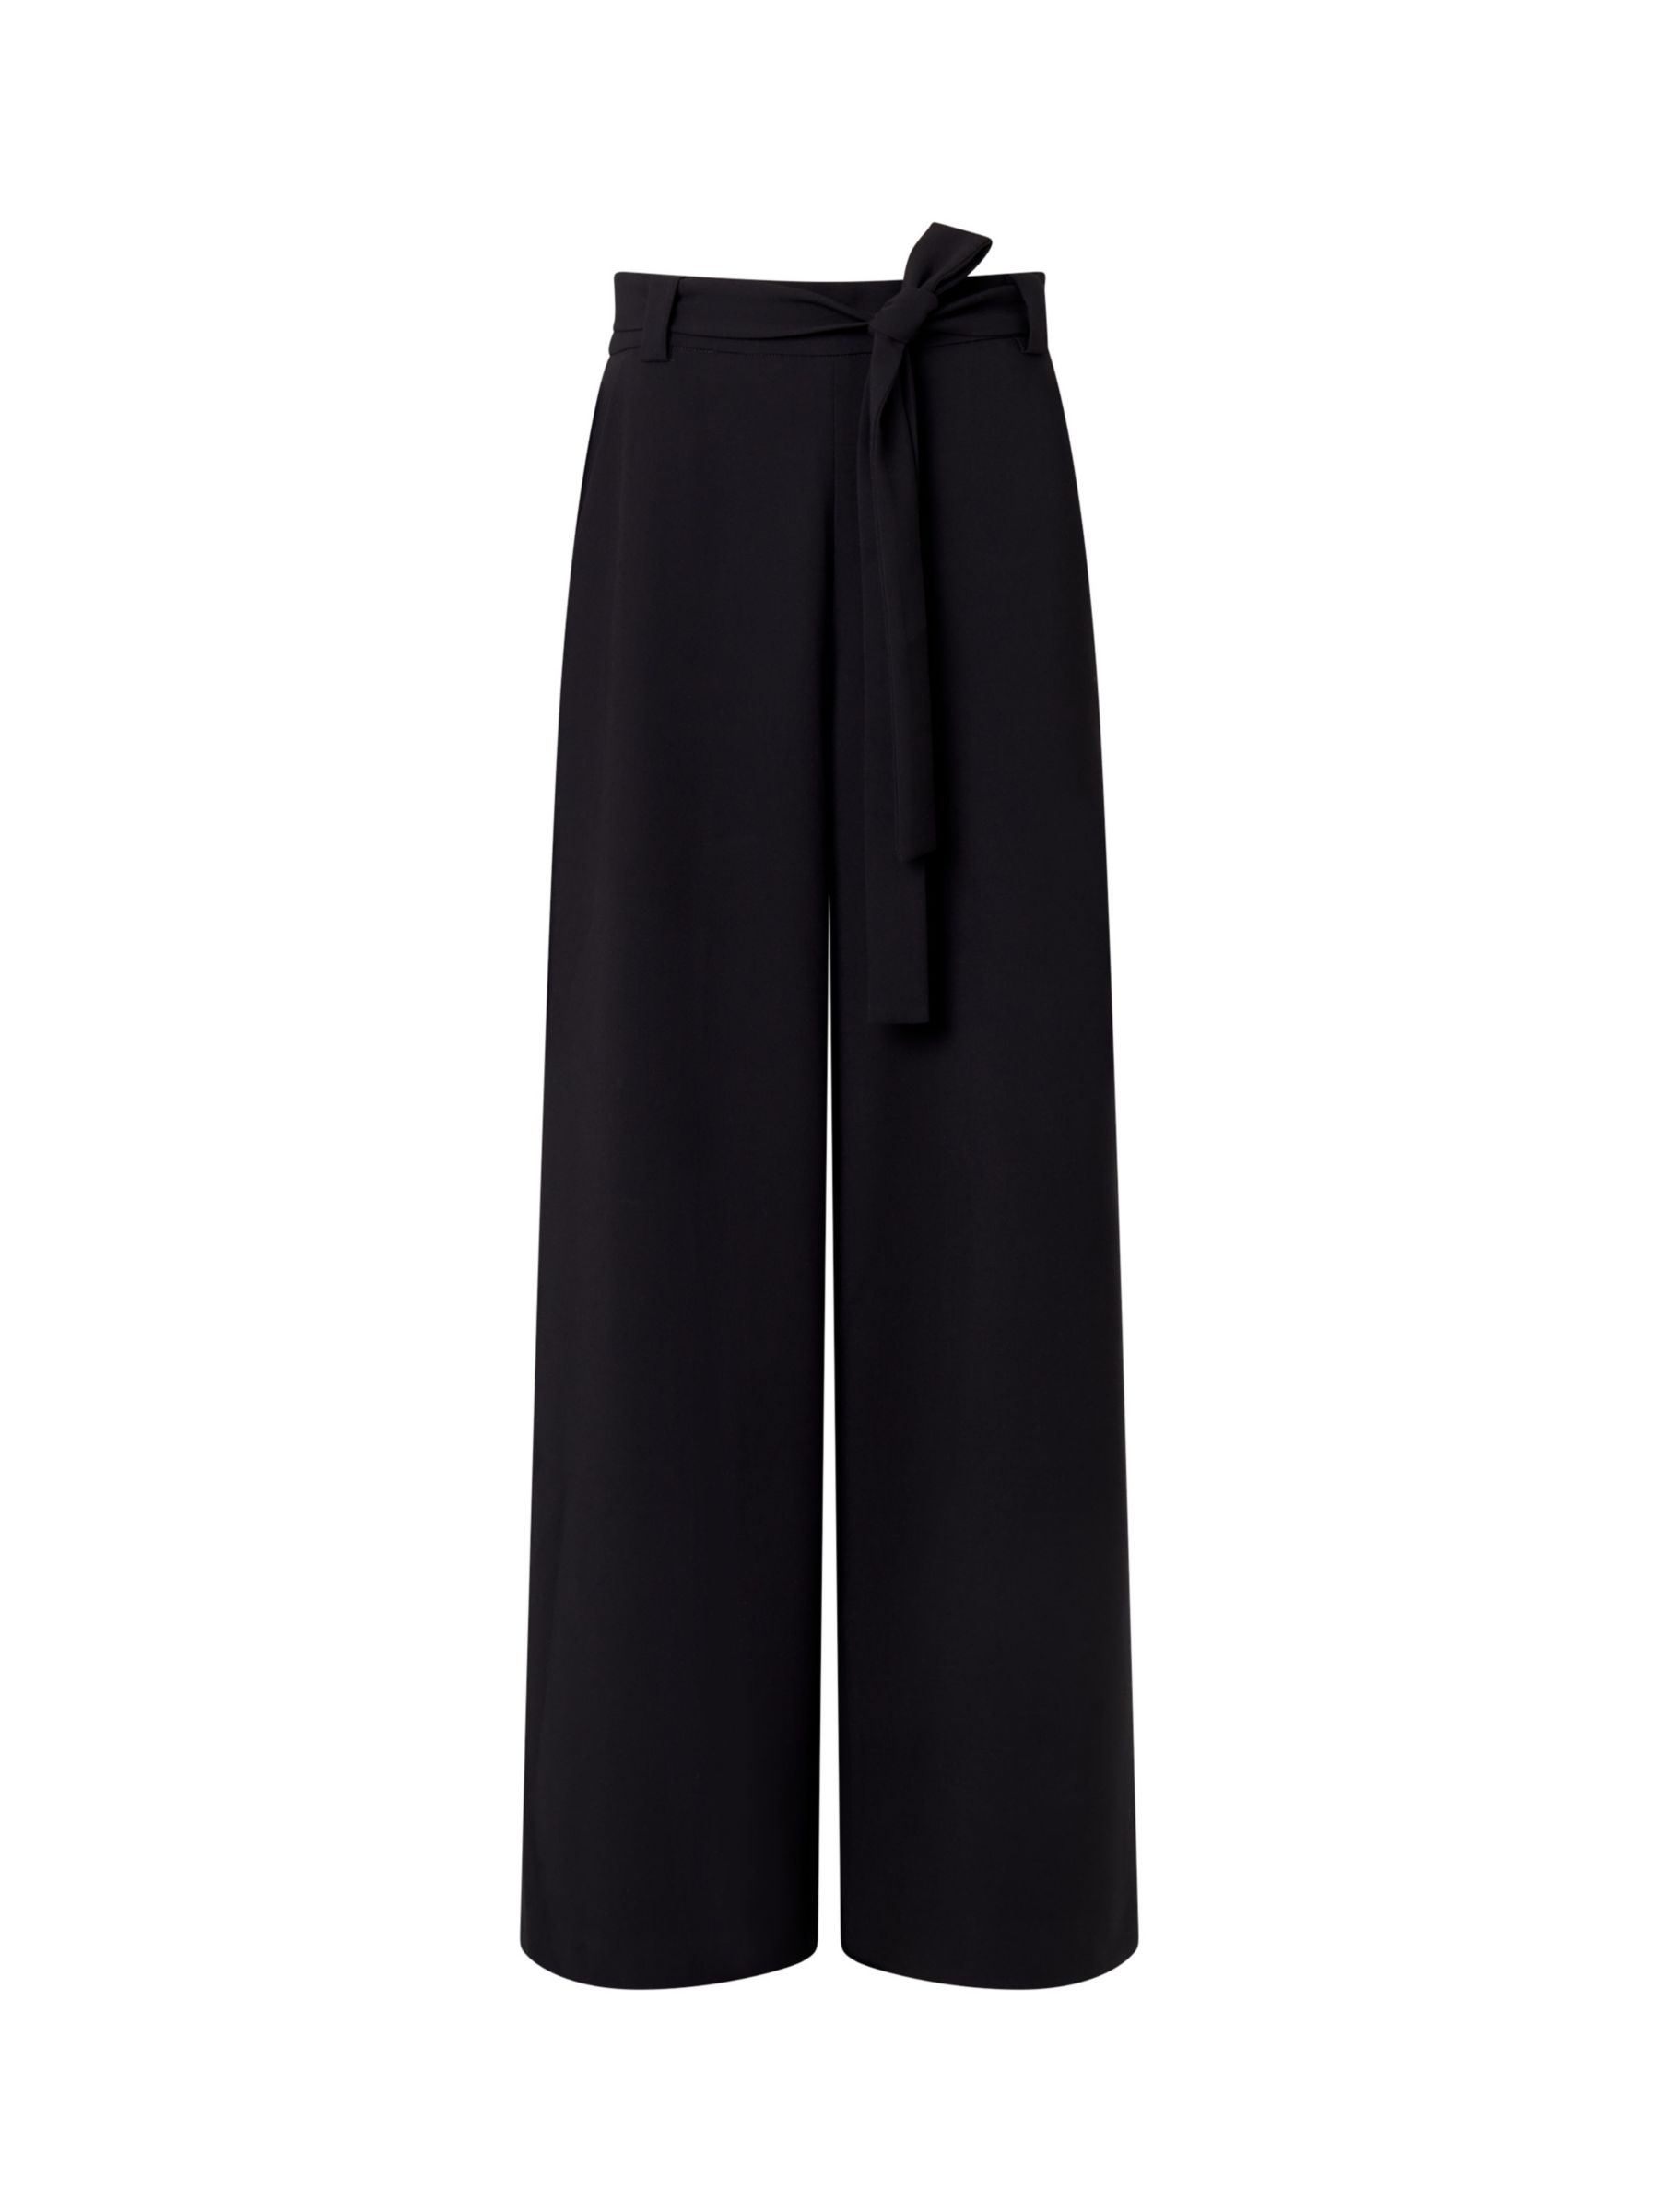 French Connection Wisper Full Length Palazzo Trousers, Black, 12